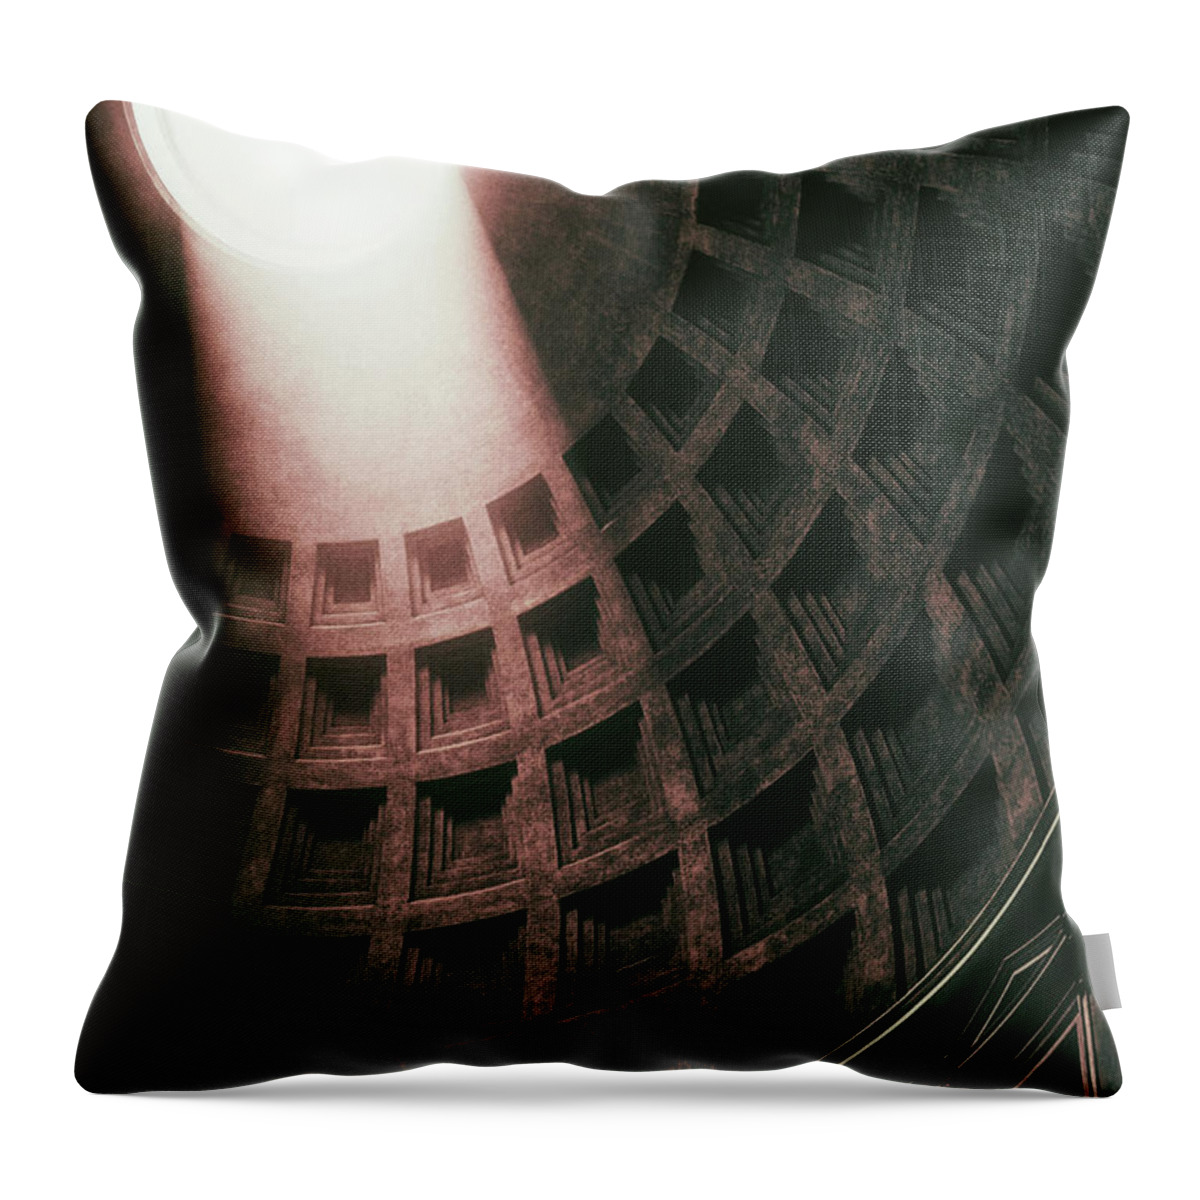 Pantheon Throw Pillow featuring the photograph Pantheon Light by Lawrence Knutsson